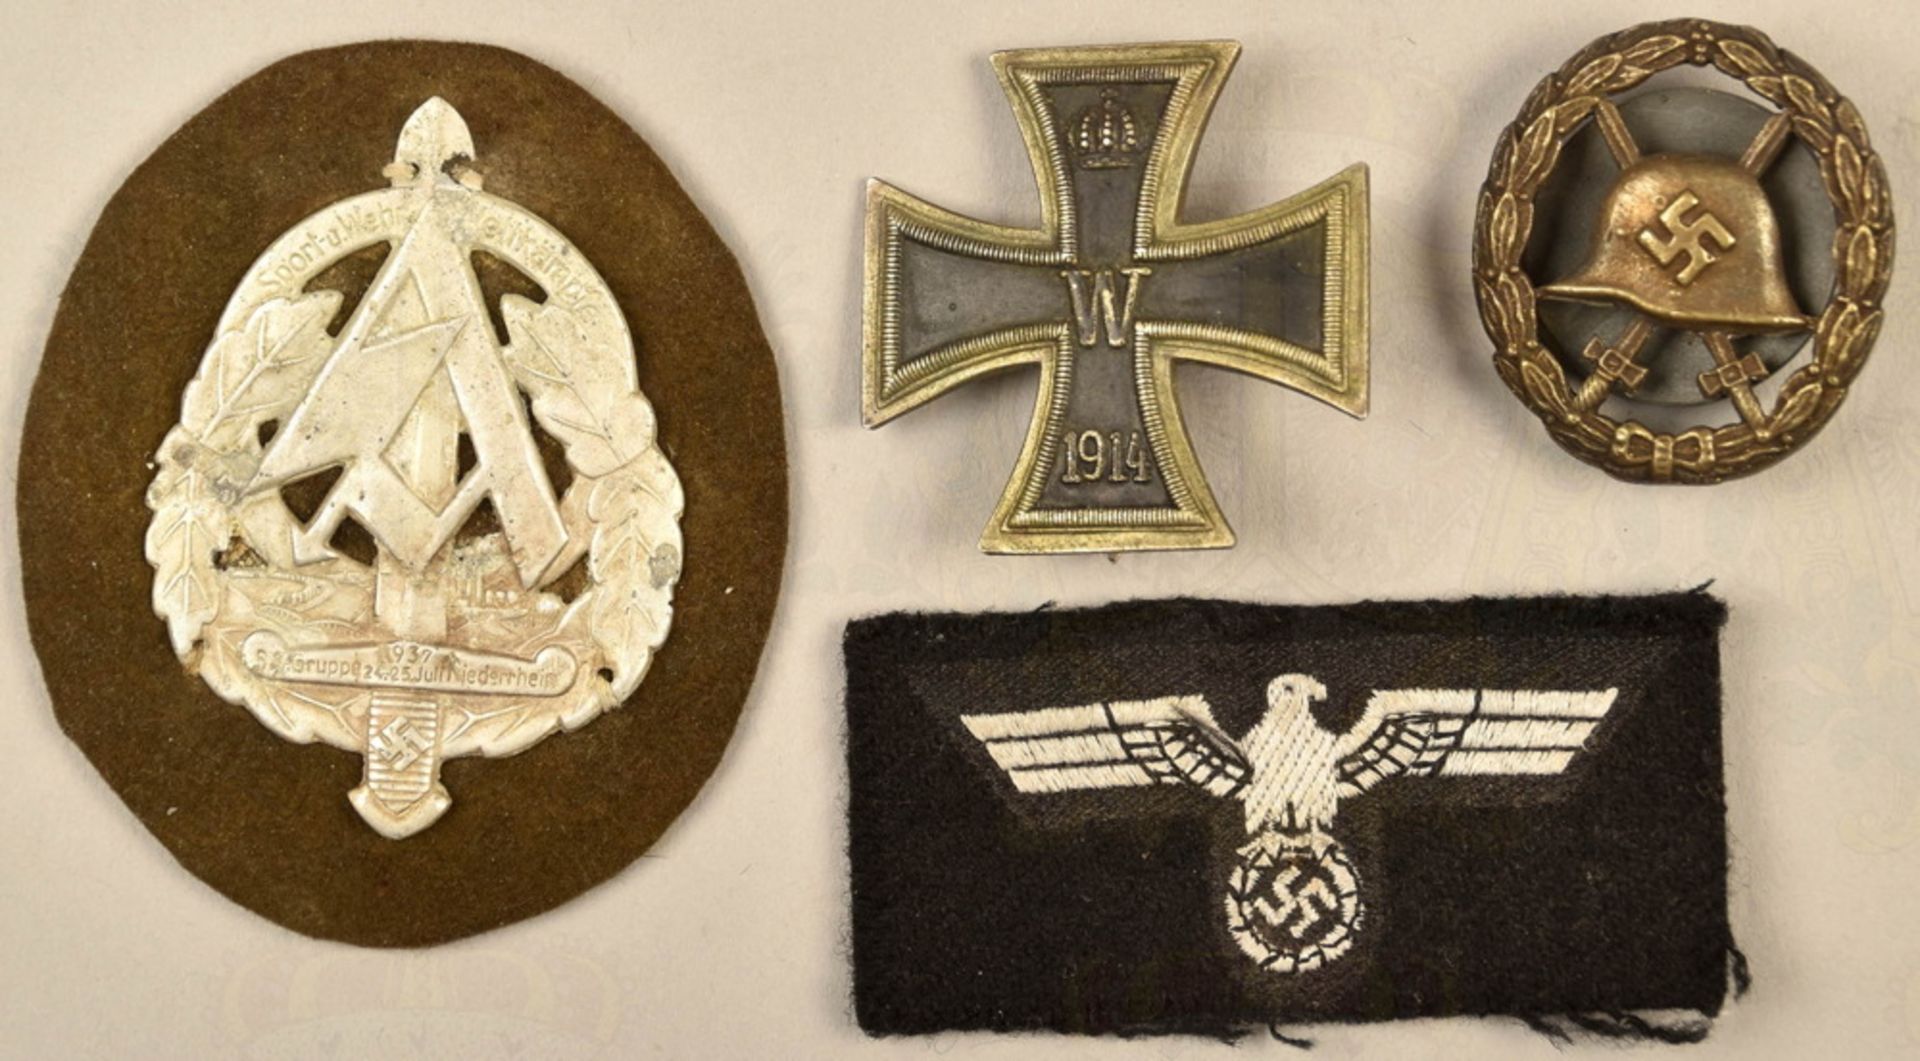 2 German military awards and 2 uniform badges - Image 2 of 3